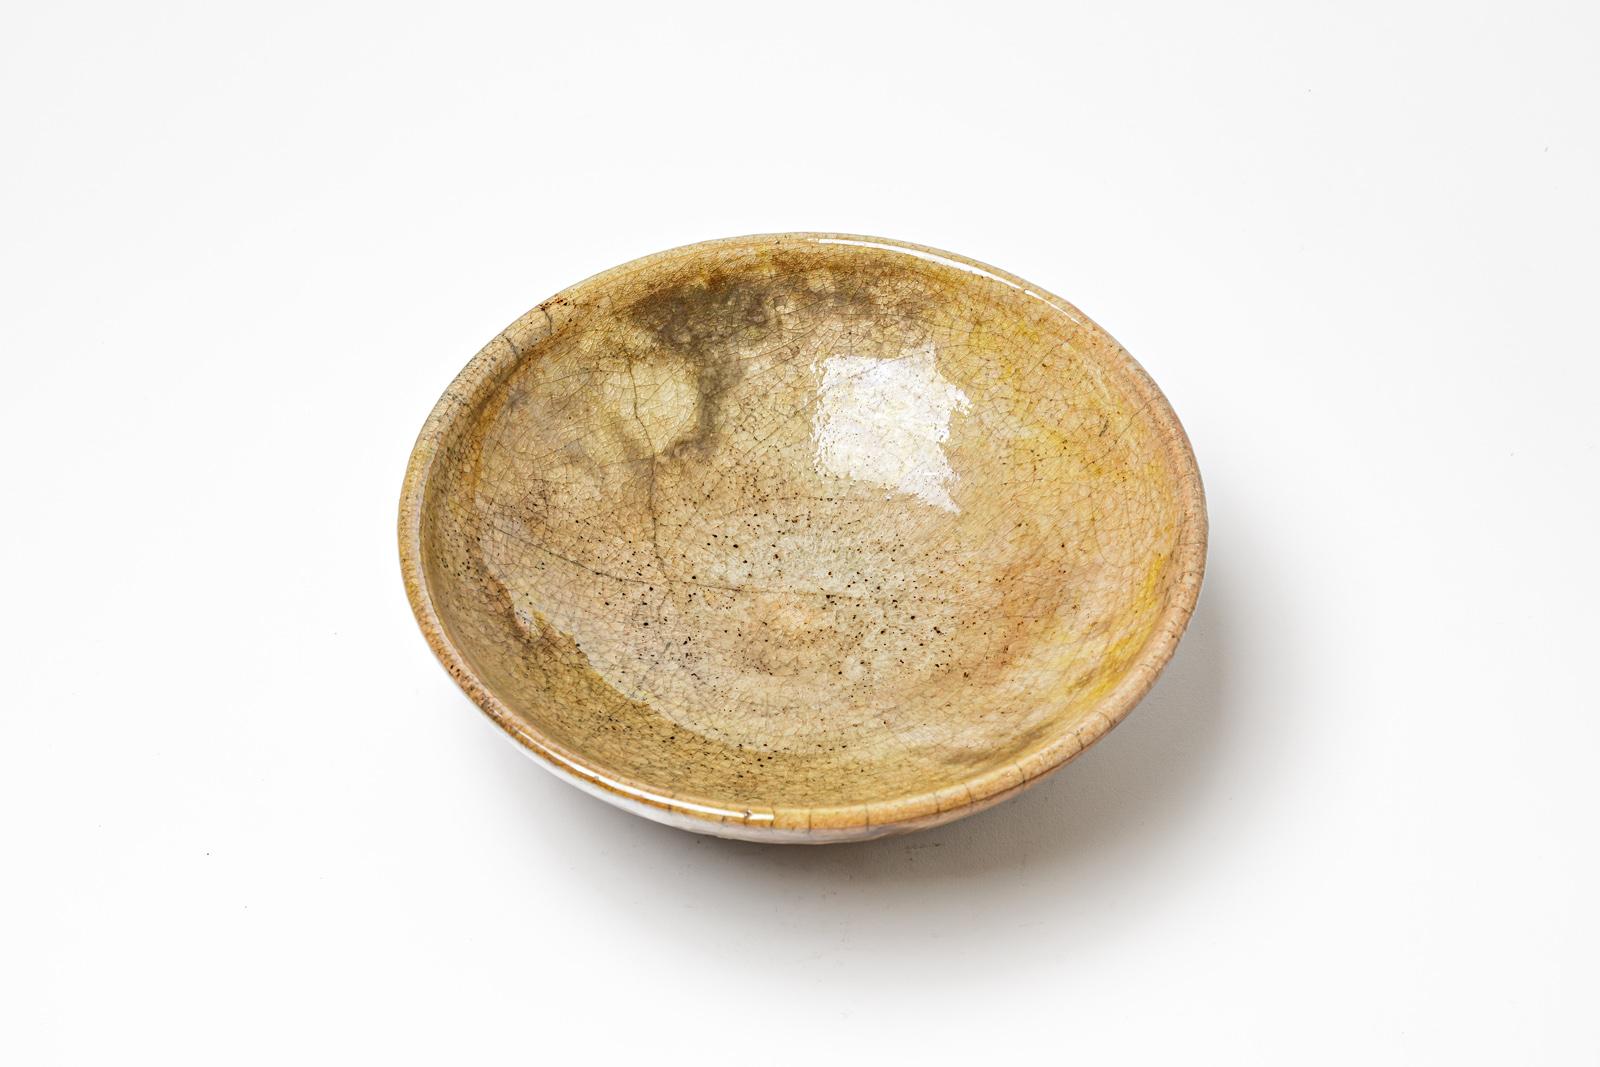 20th Century Golden glazed ceramic cup with metallic highlights by Gisèle Buthod Garçon, 1990 For Sale